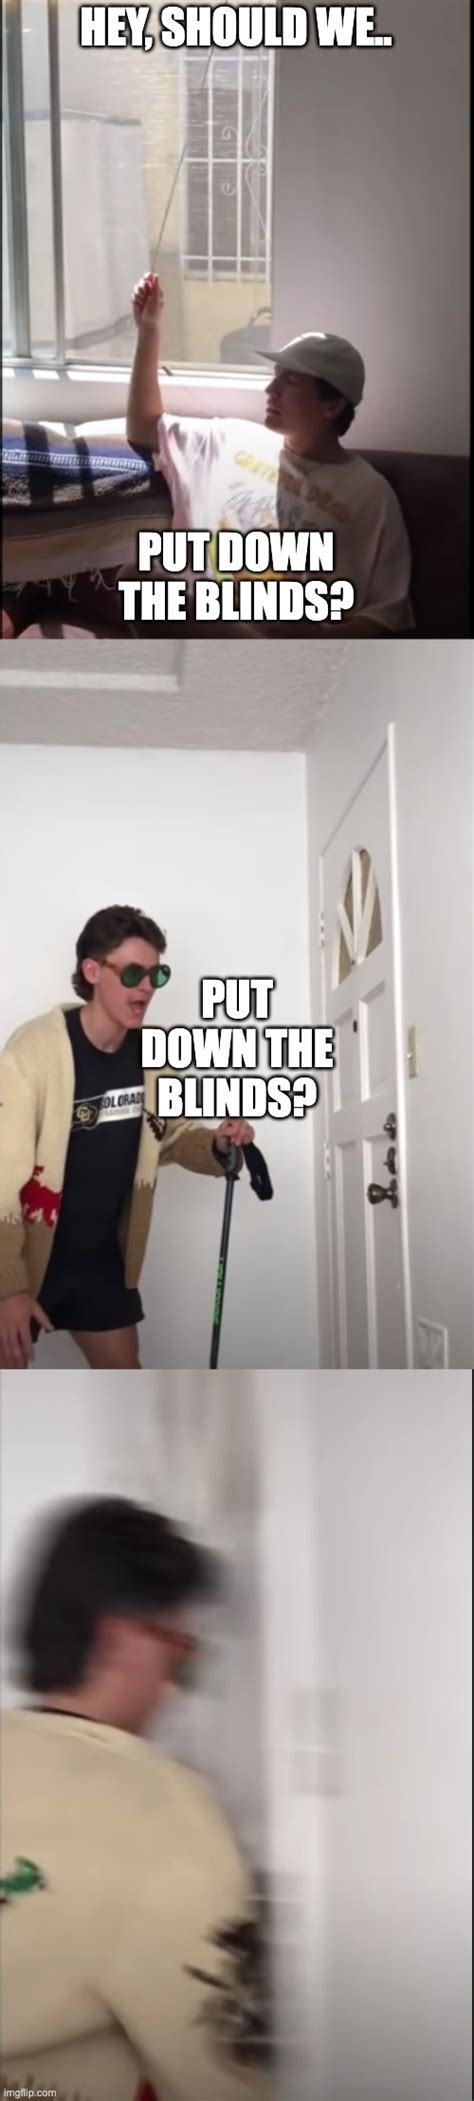 Blinds Imgflip